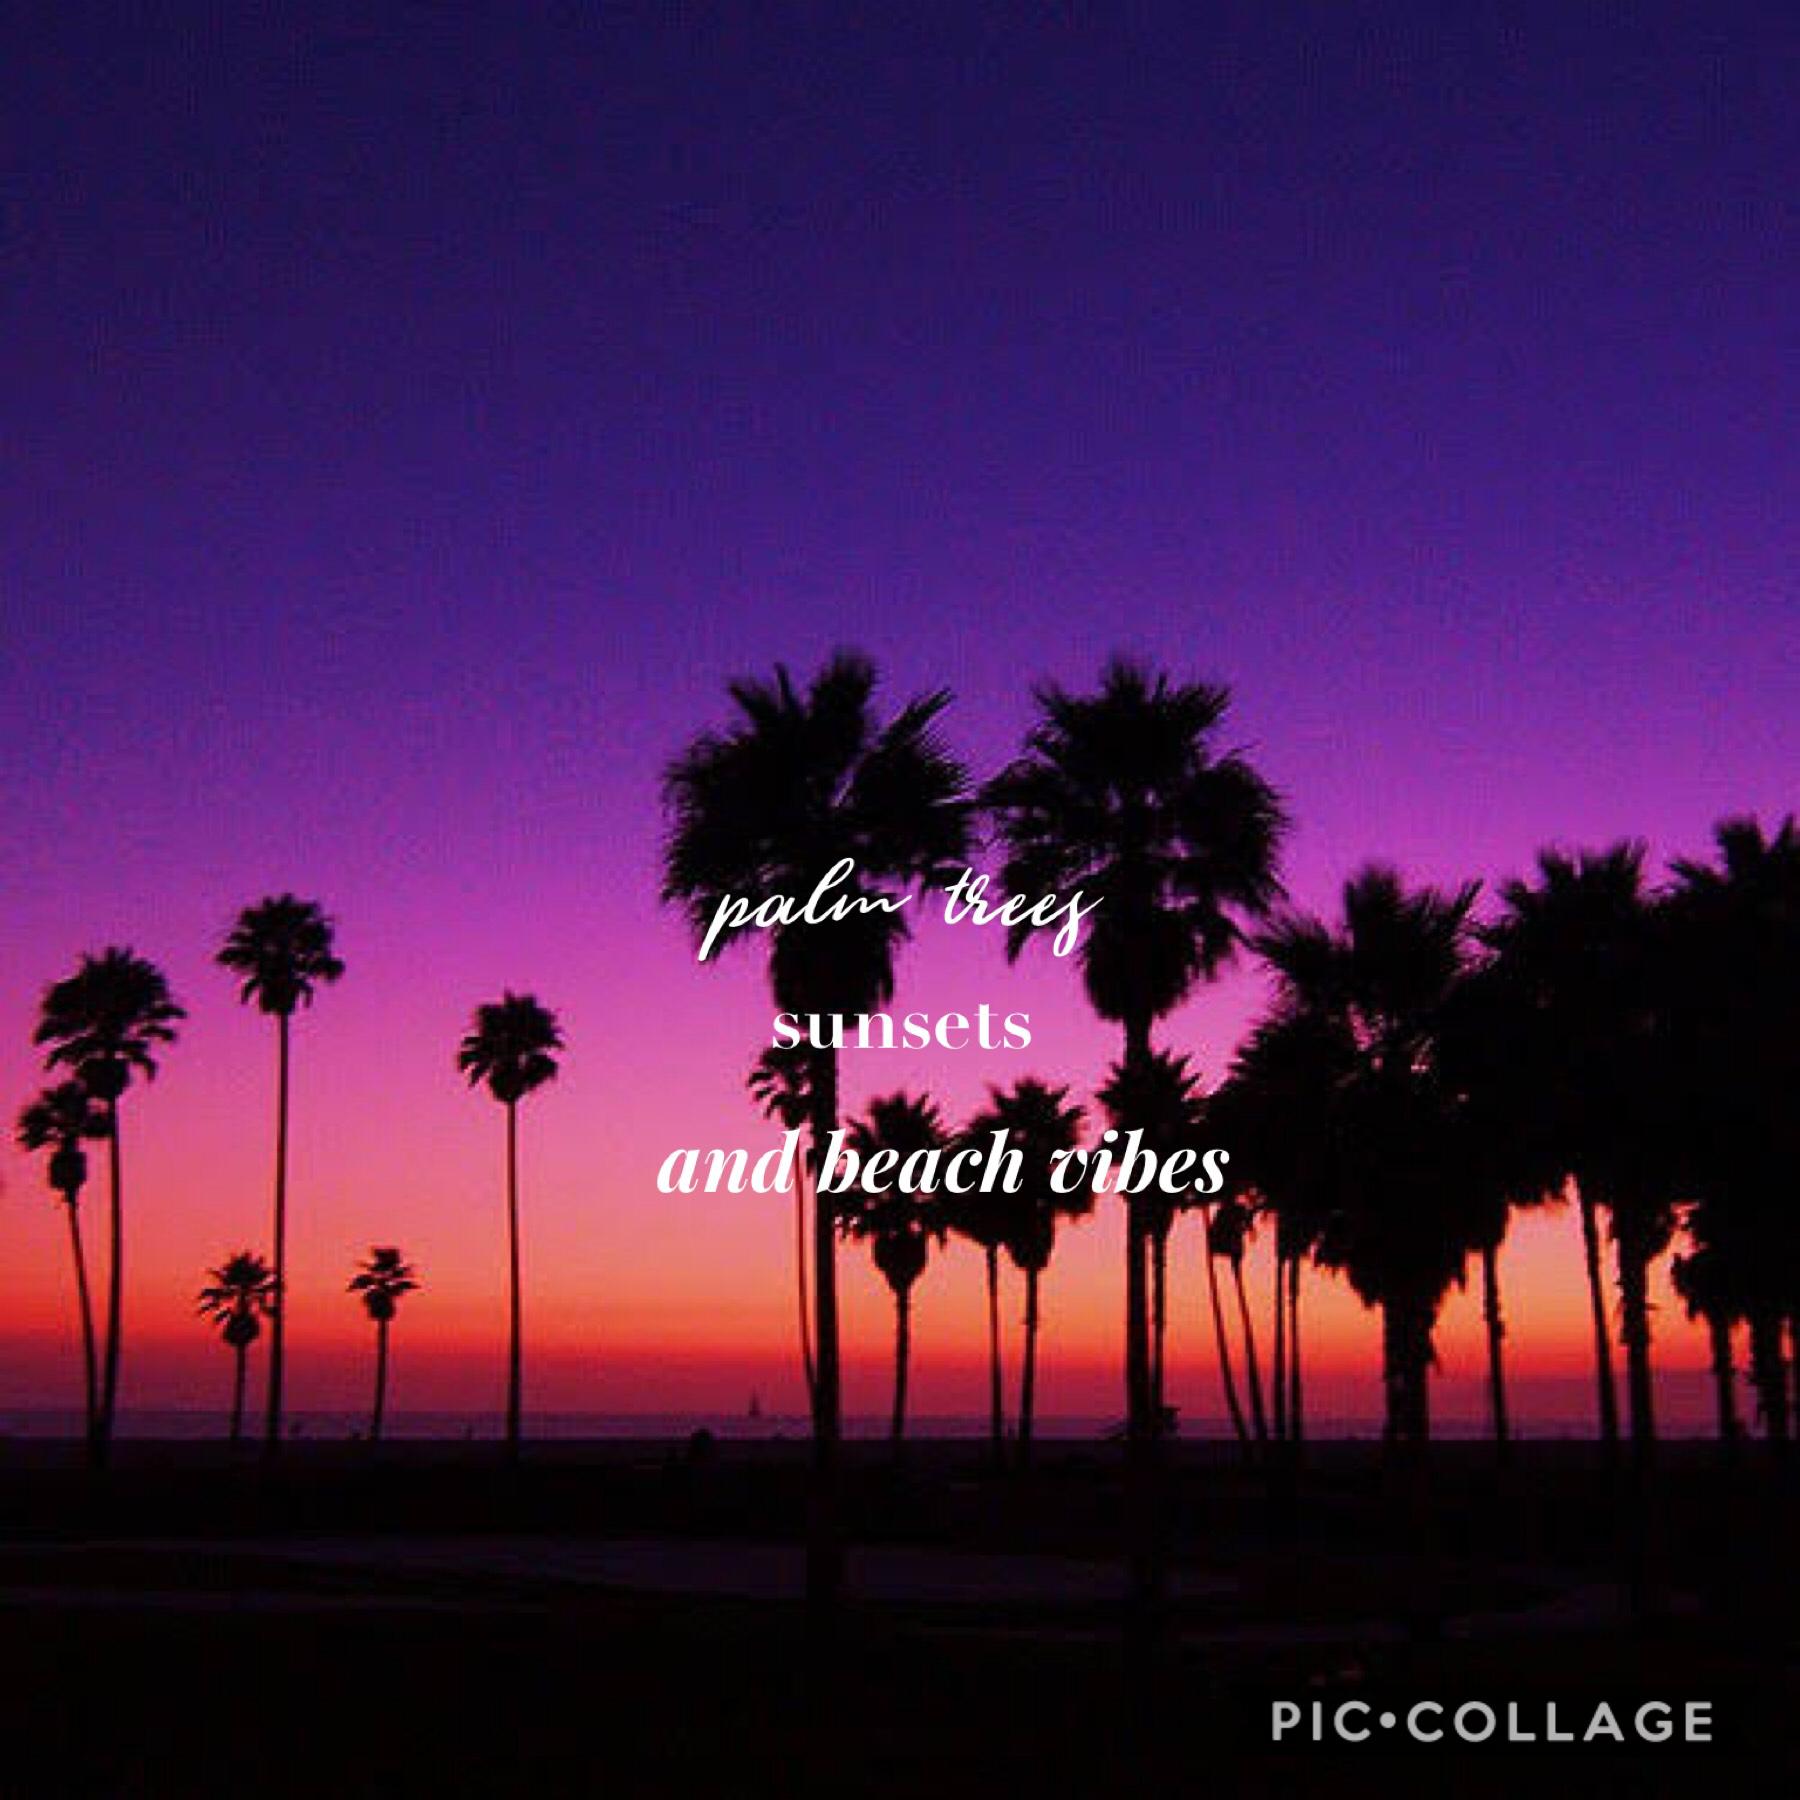 Palm trees sunsets and beach vibes